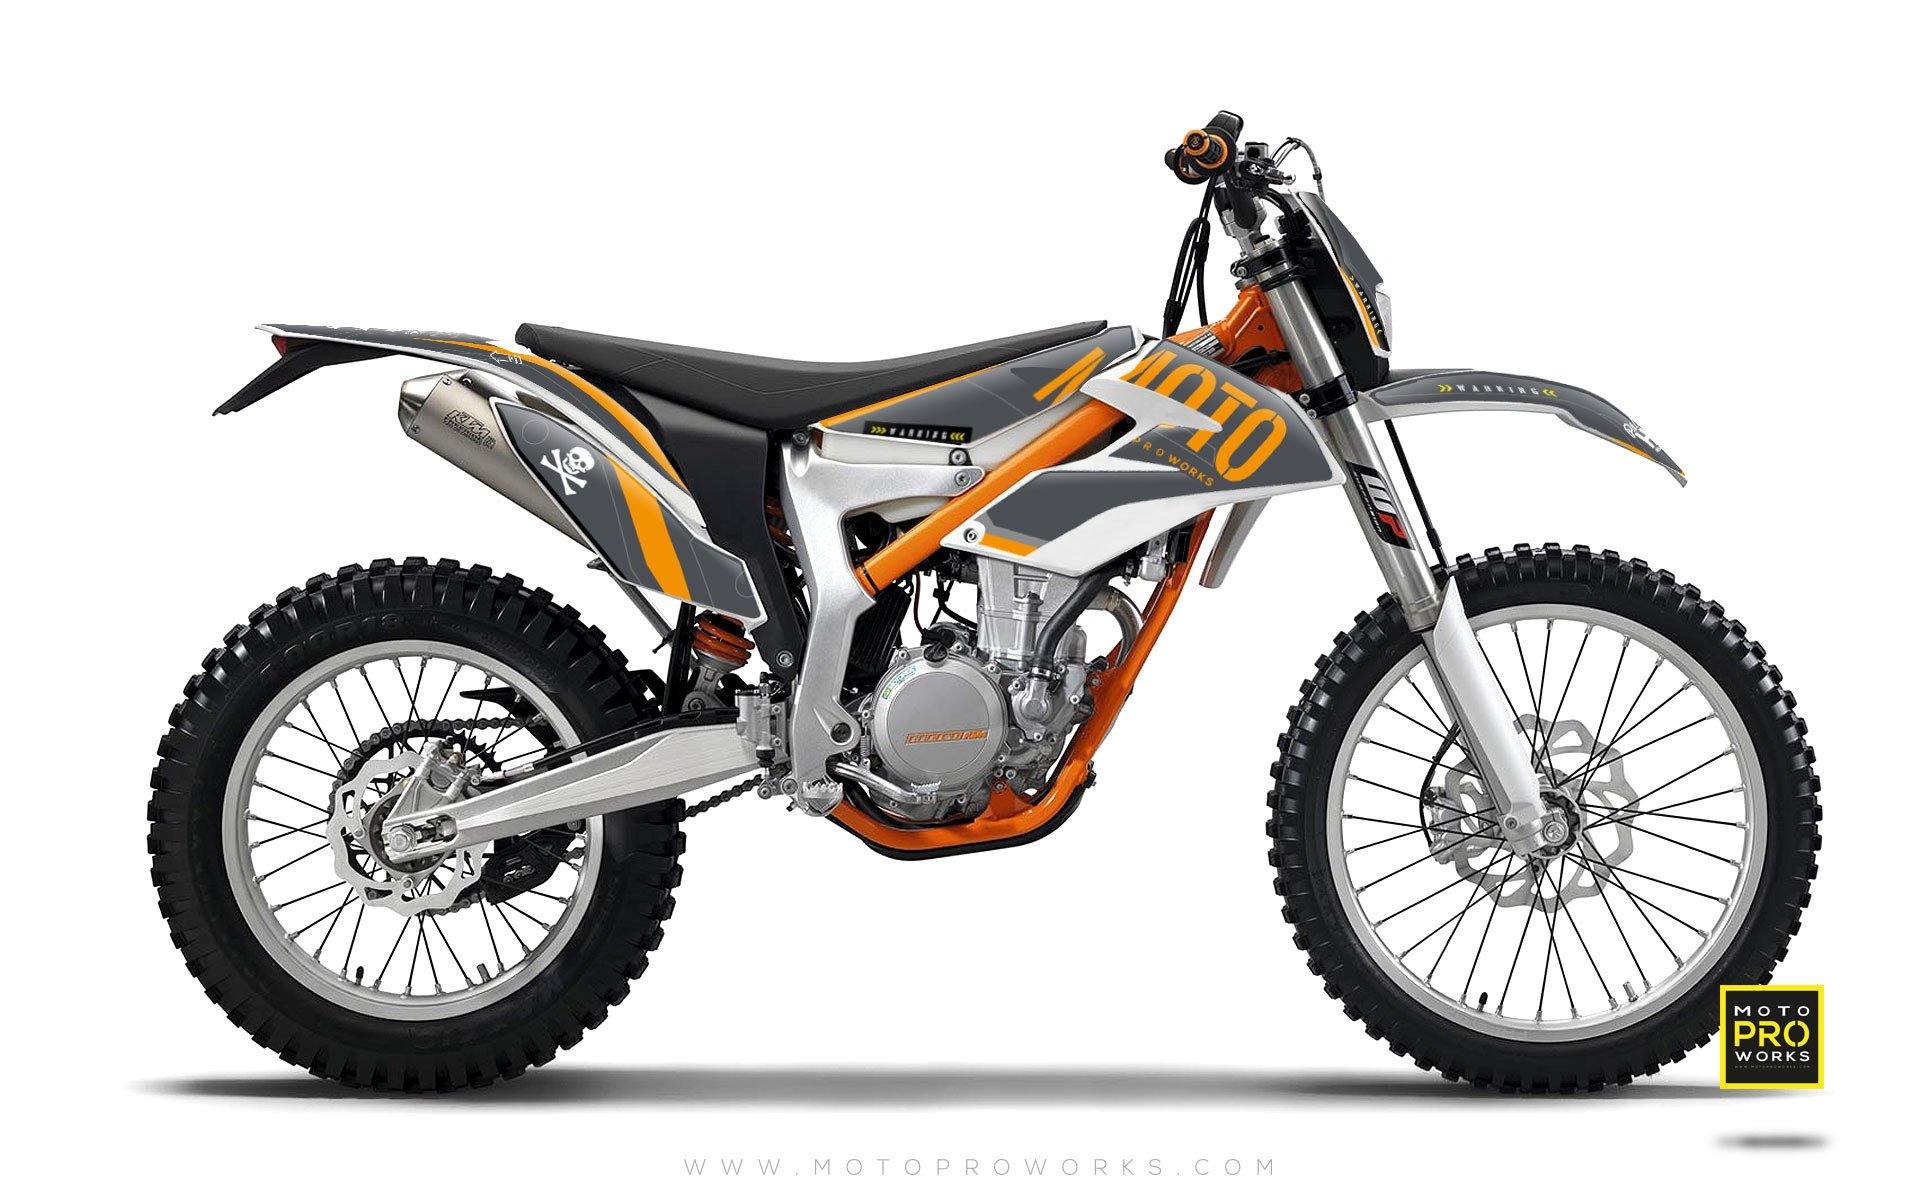 KTM GRAPHIC KIT - "GTECH" (grey) - MotoProWorks | Decals and Bike Graphic kit